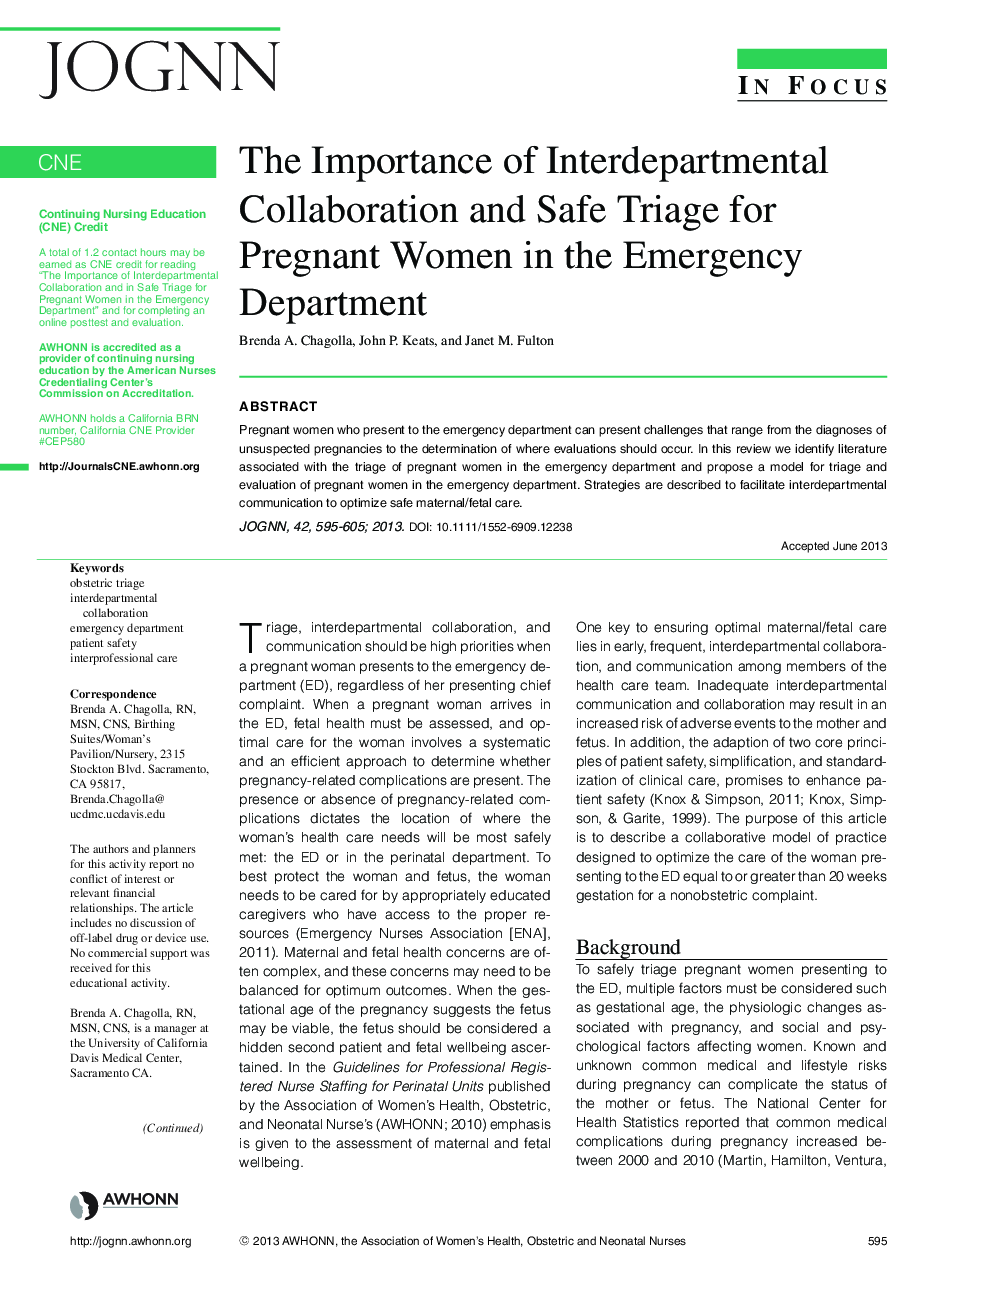 The Importance of Interdepartmental Collaboration and Safe Triage for Pregnant Women in the Emergency Department